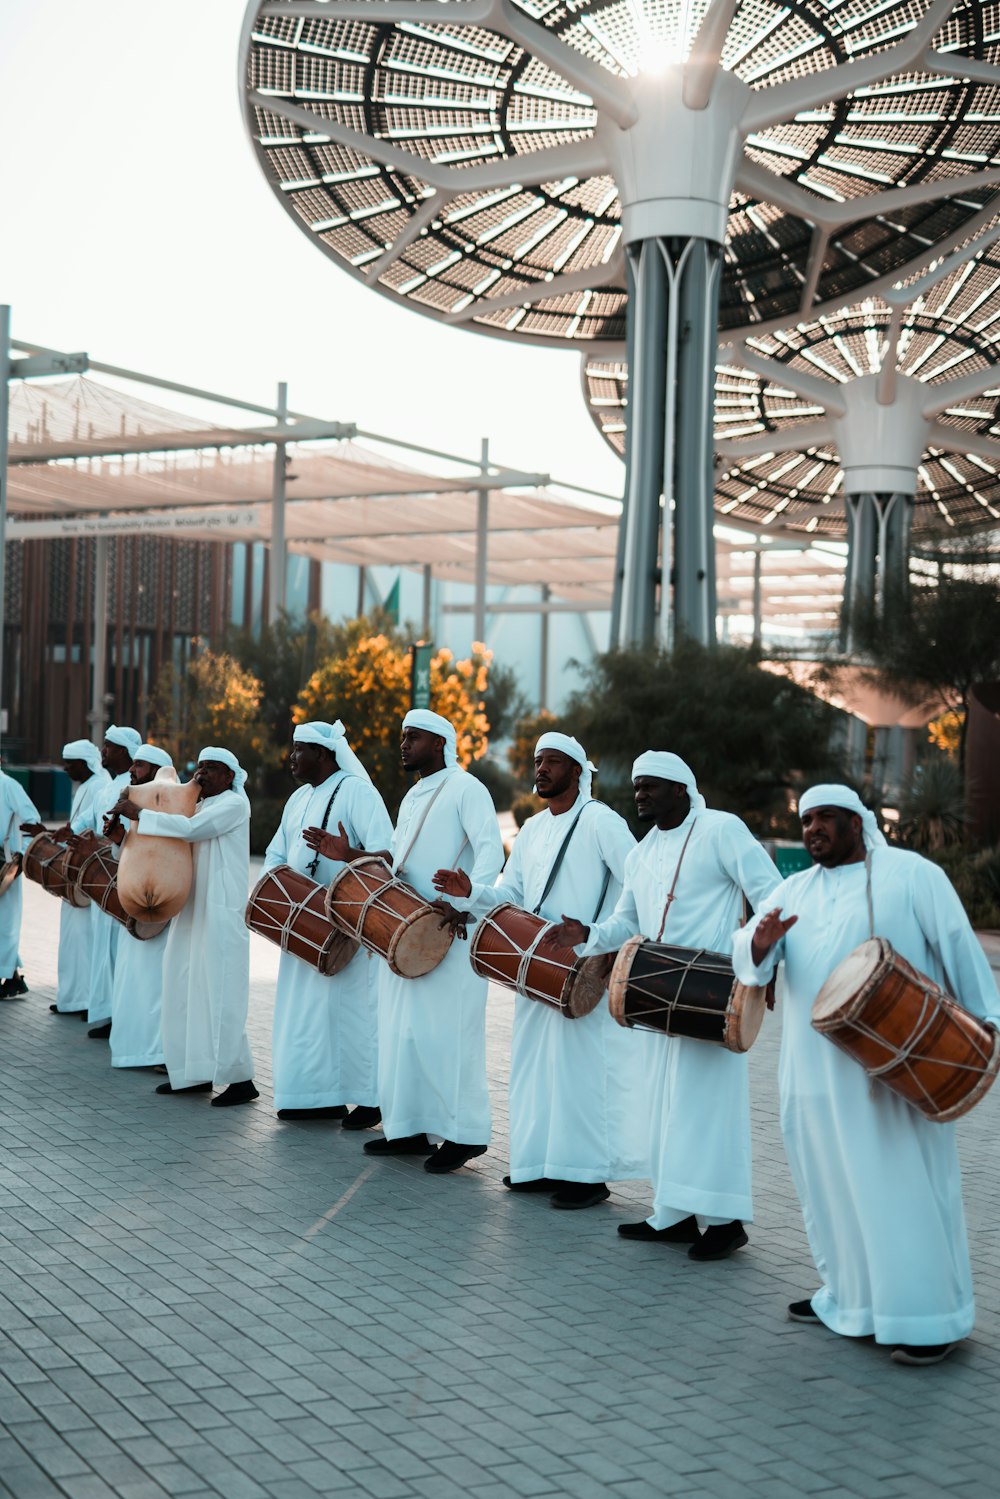 a group of men dressed in white holding drums